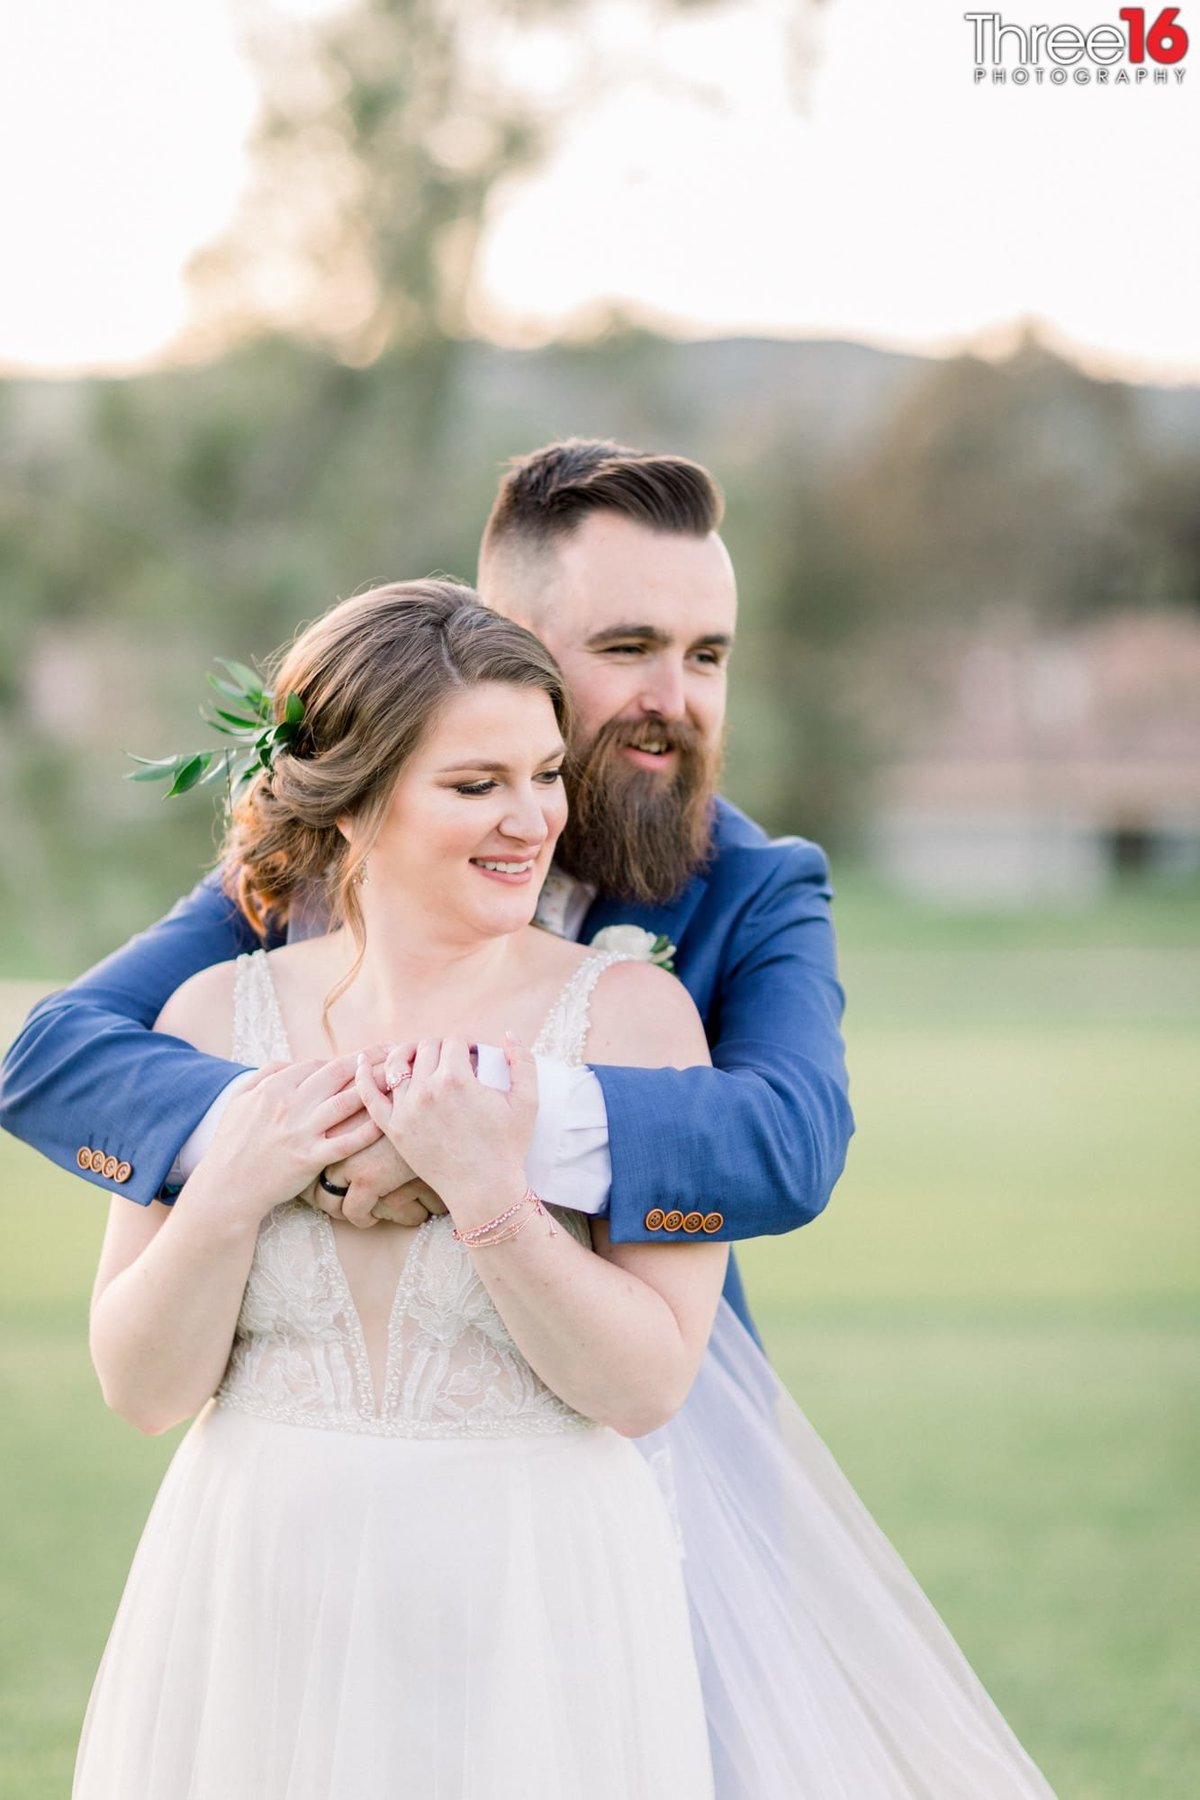 Groom fully embraces his Bride from behind during photo session